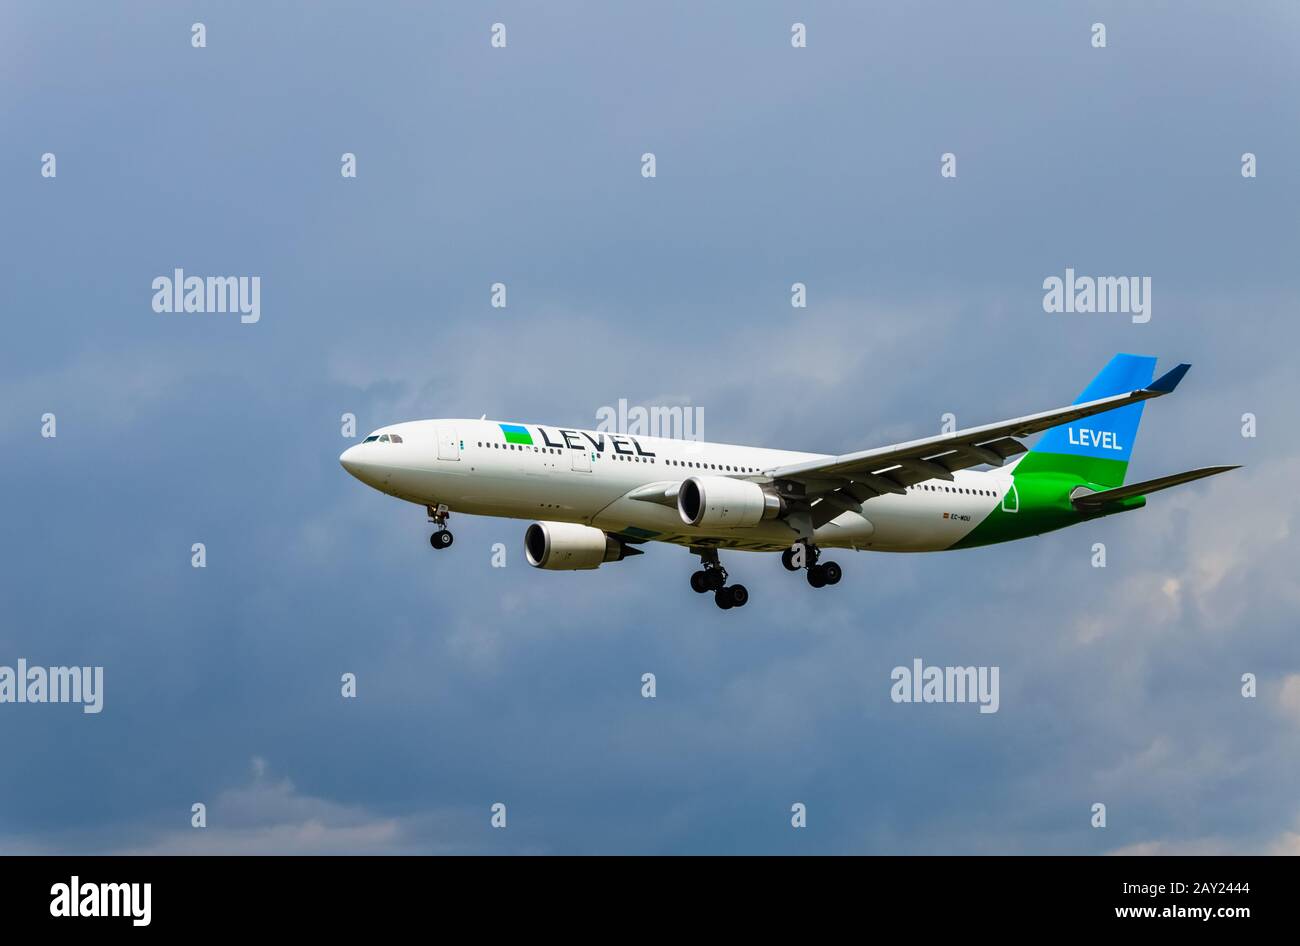 Barcelona, Spain; May 18, 2019: Airbus A320 plane of the company Level, landing at El Prat Airport in Barcelona Stock Photo